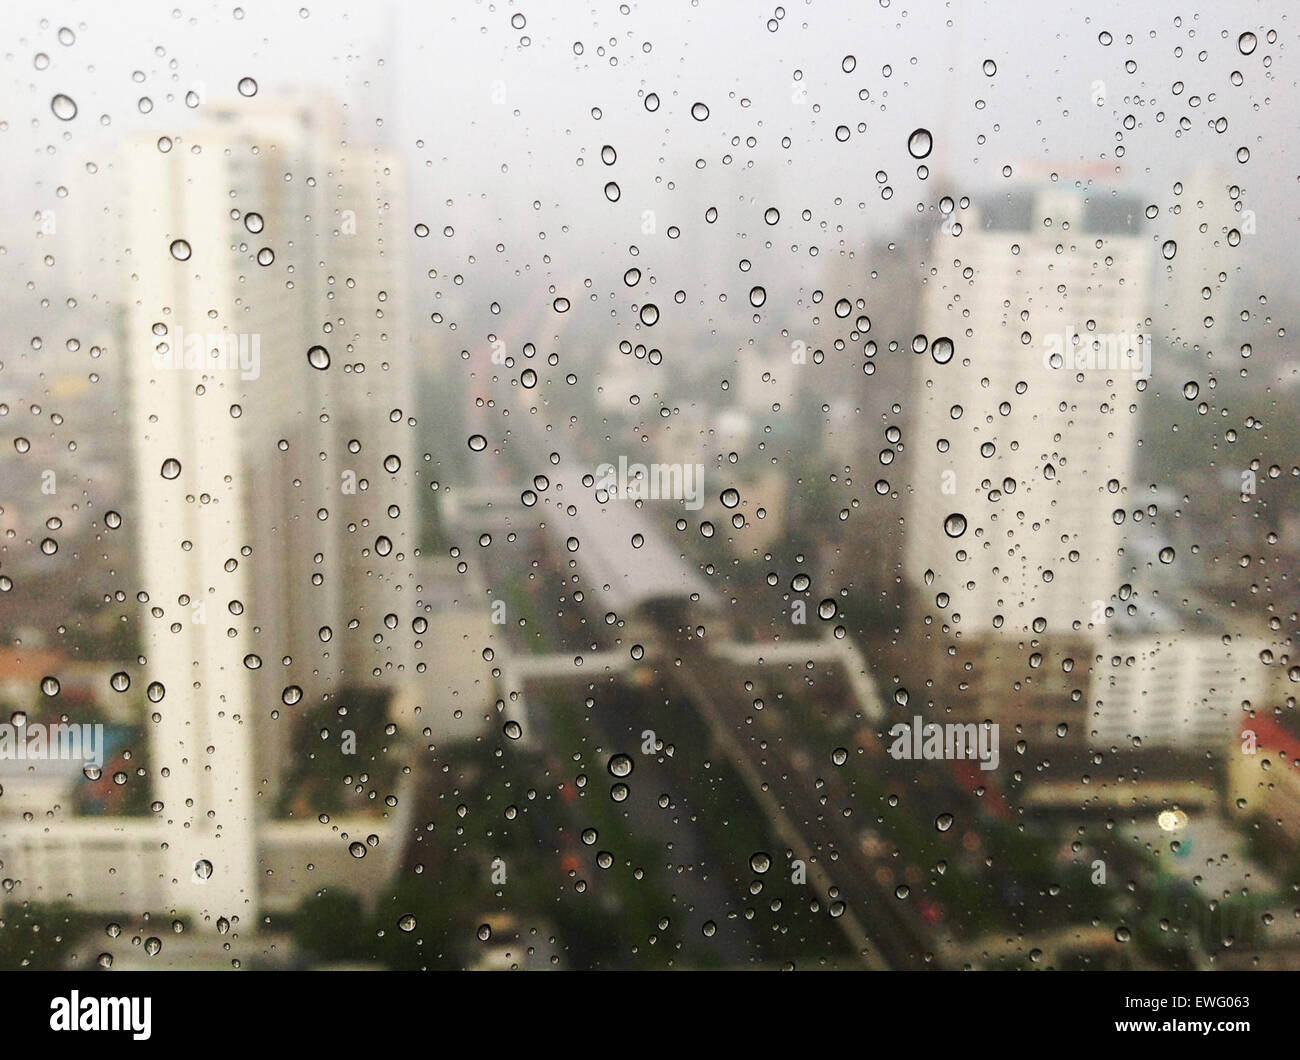 Water Droplets on Window Showing City Skyscrapers Stock Photo